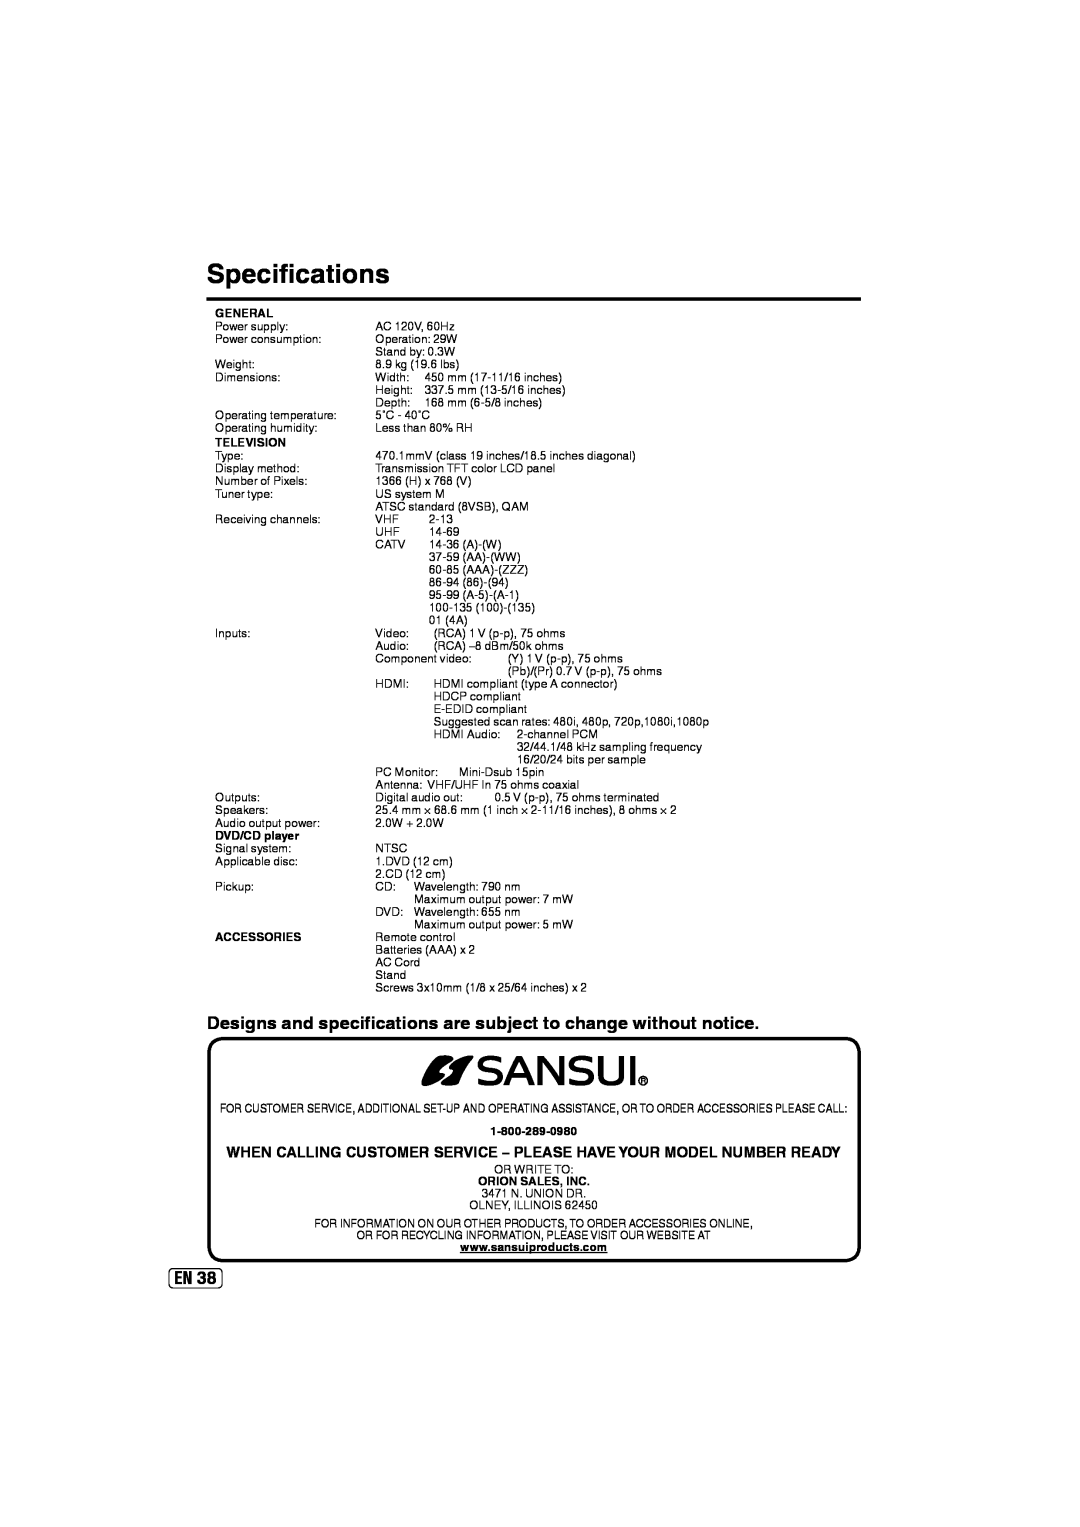 Sansui SLEDVD197 Specifications, Designs and specifications are subject to change without notice, General, Television 